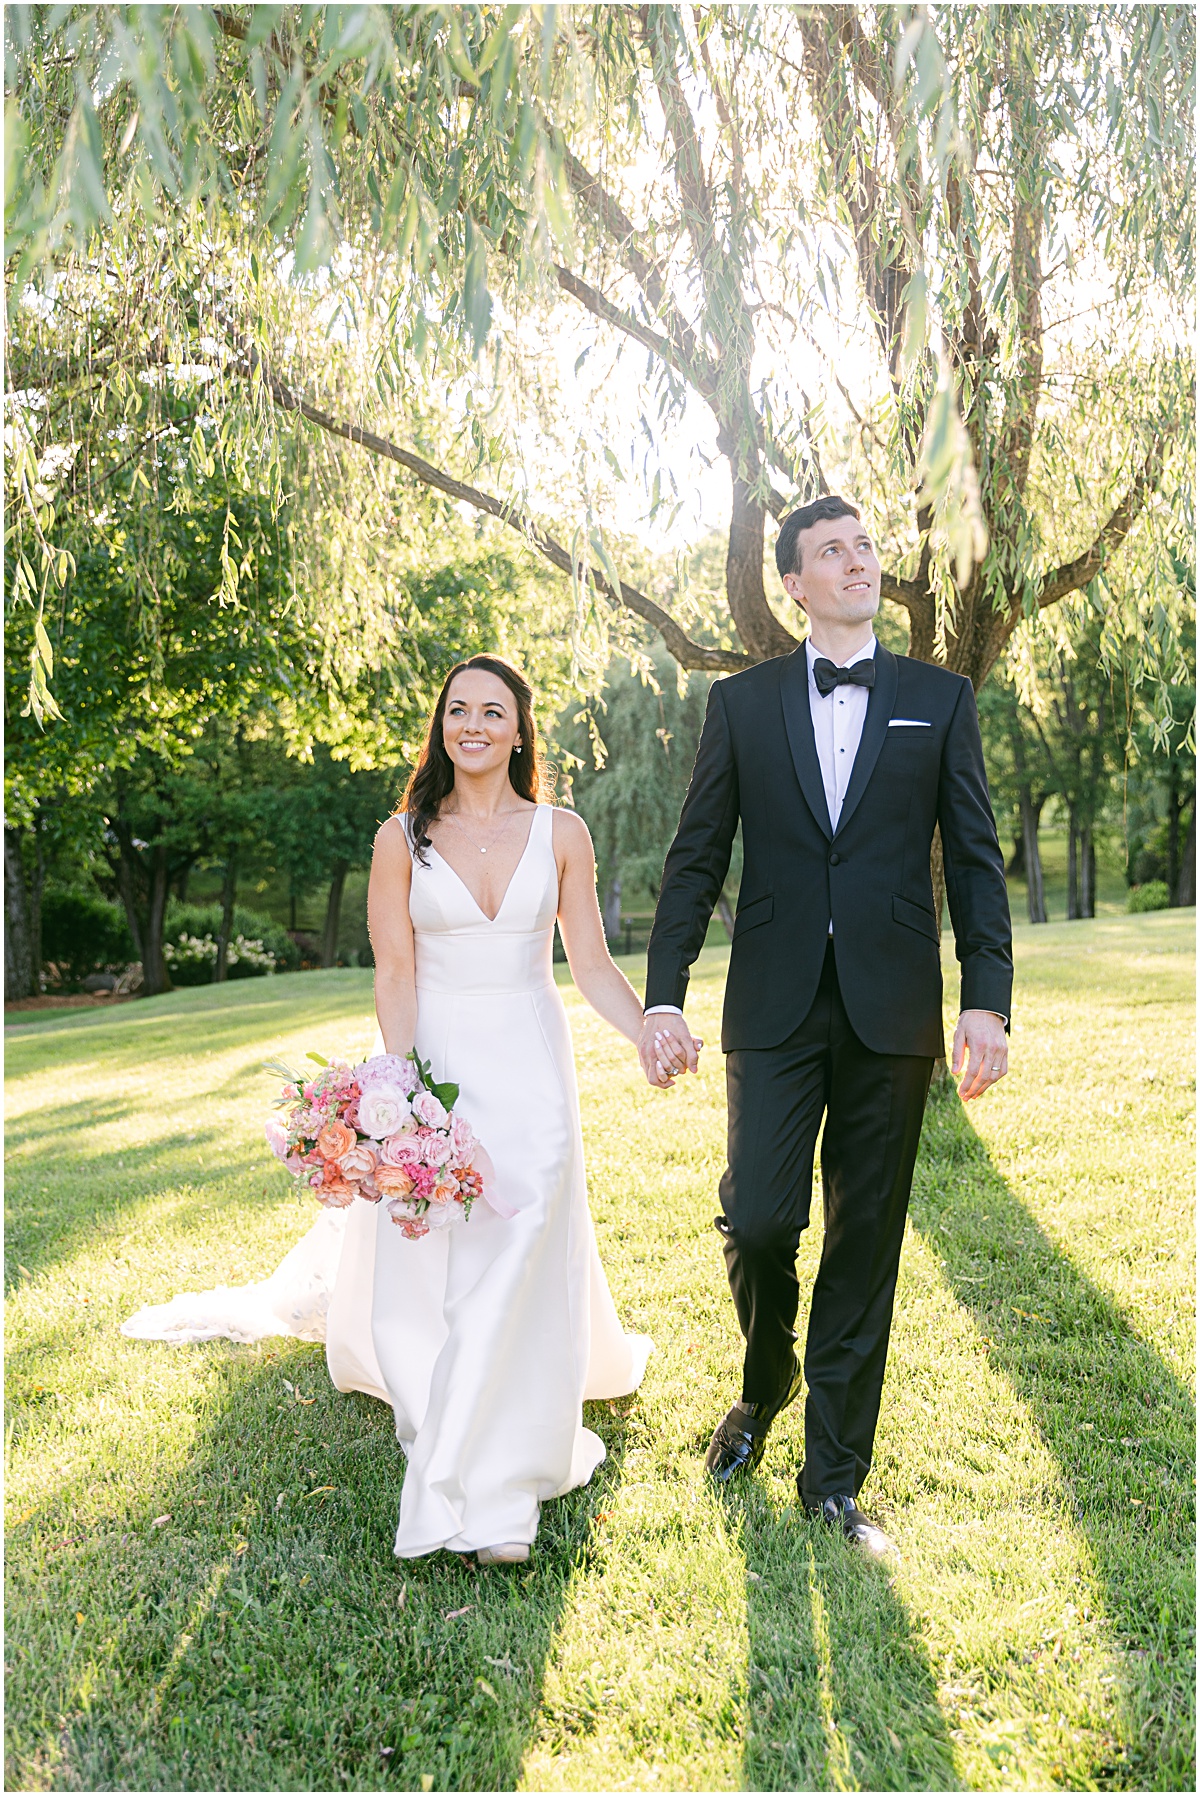 Joyful summer wedding at the Inn at Willow Grove by Sarah Bradshaw. Planning by Kelley Cannon Events.